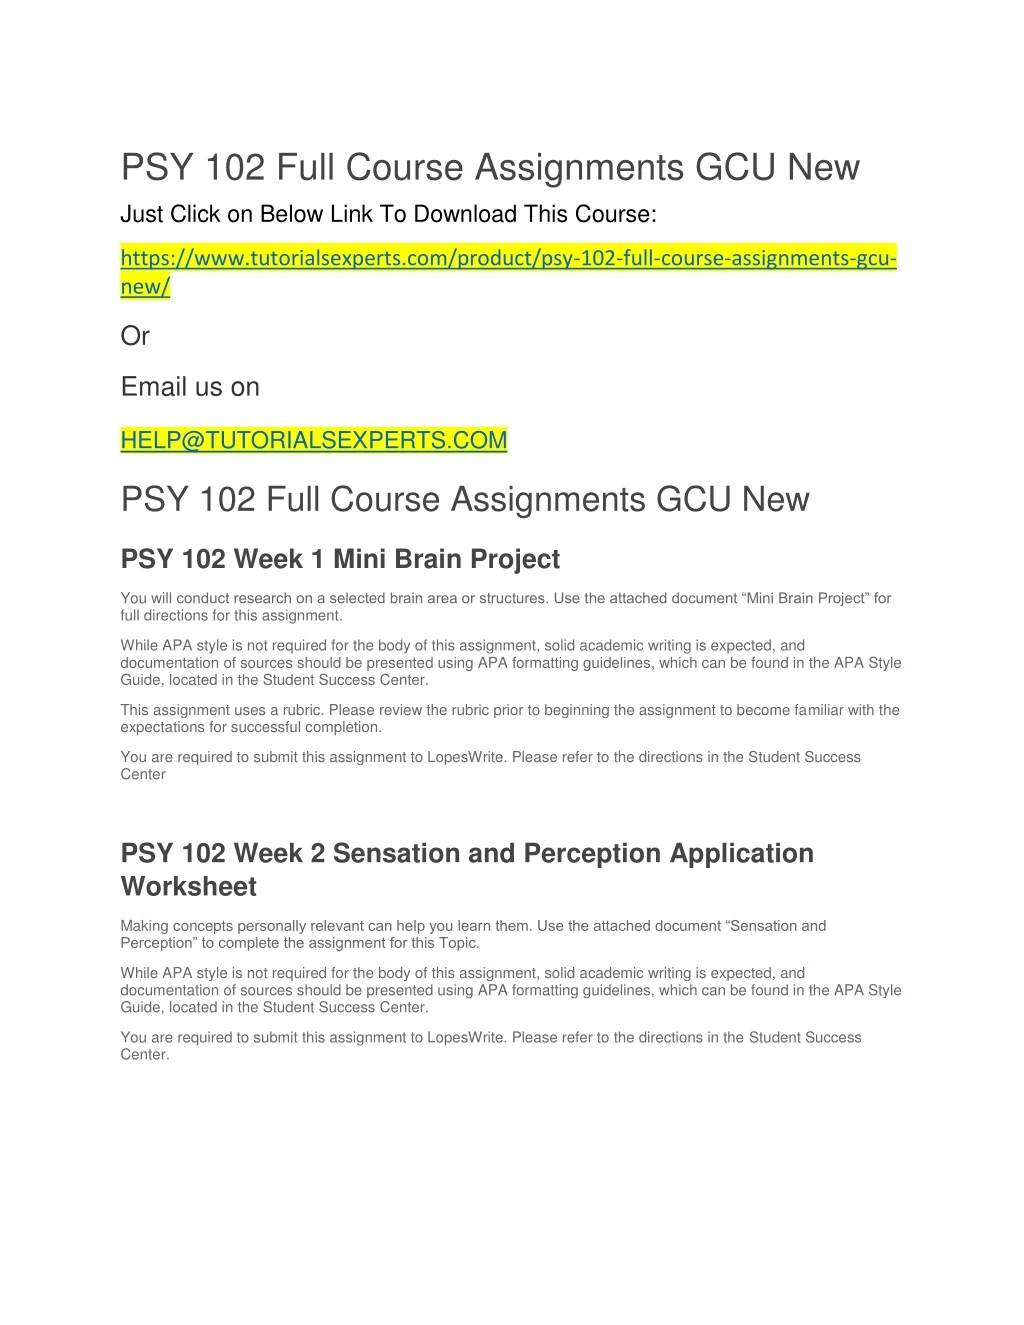 psy 102 full course assignments gcu new just